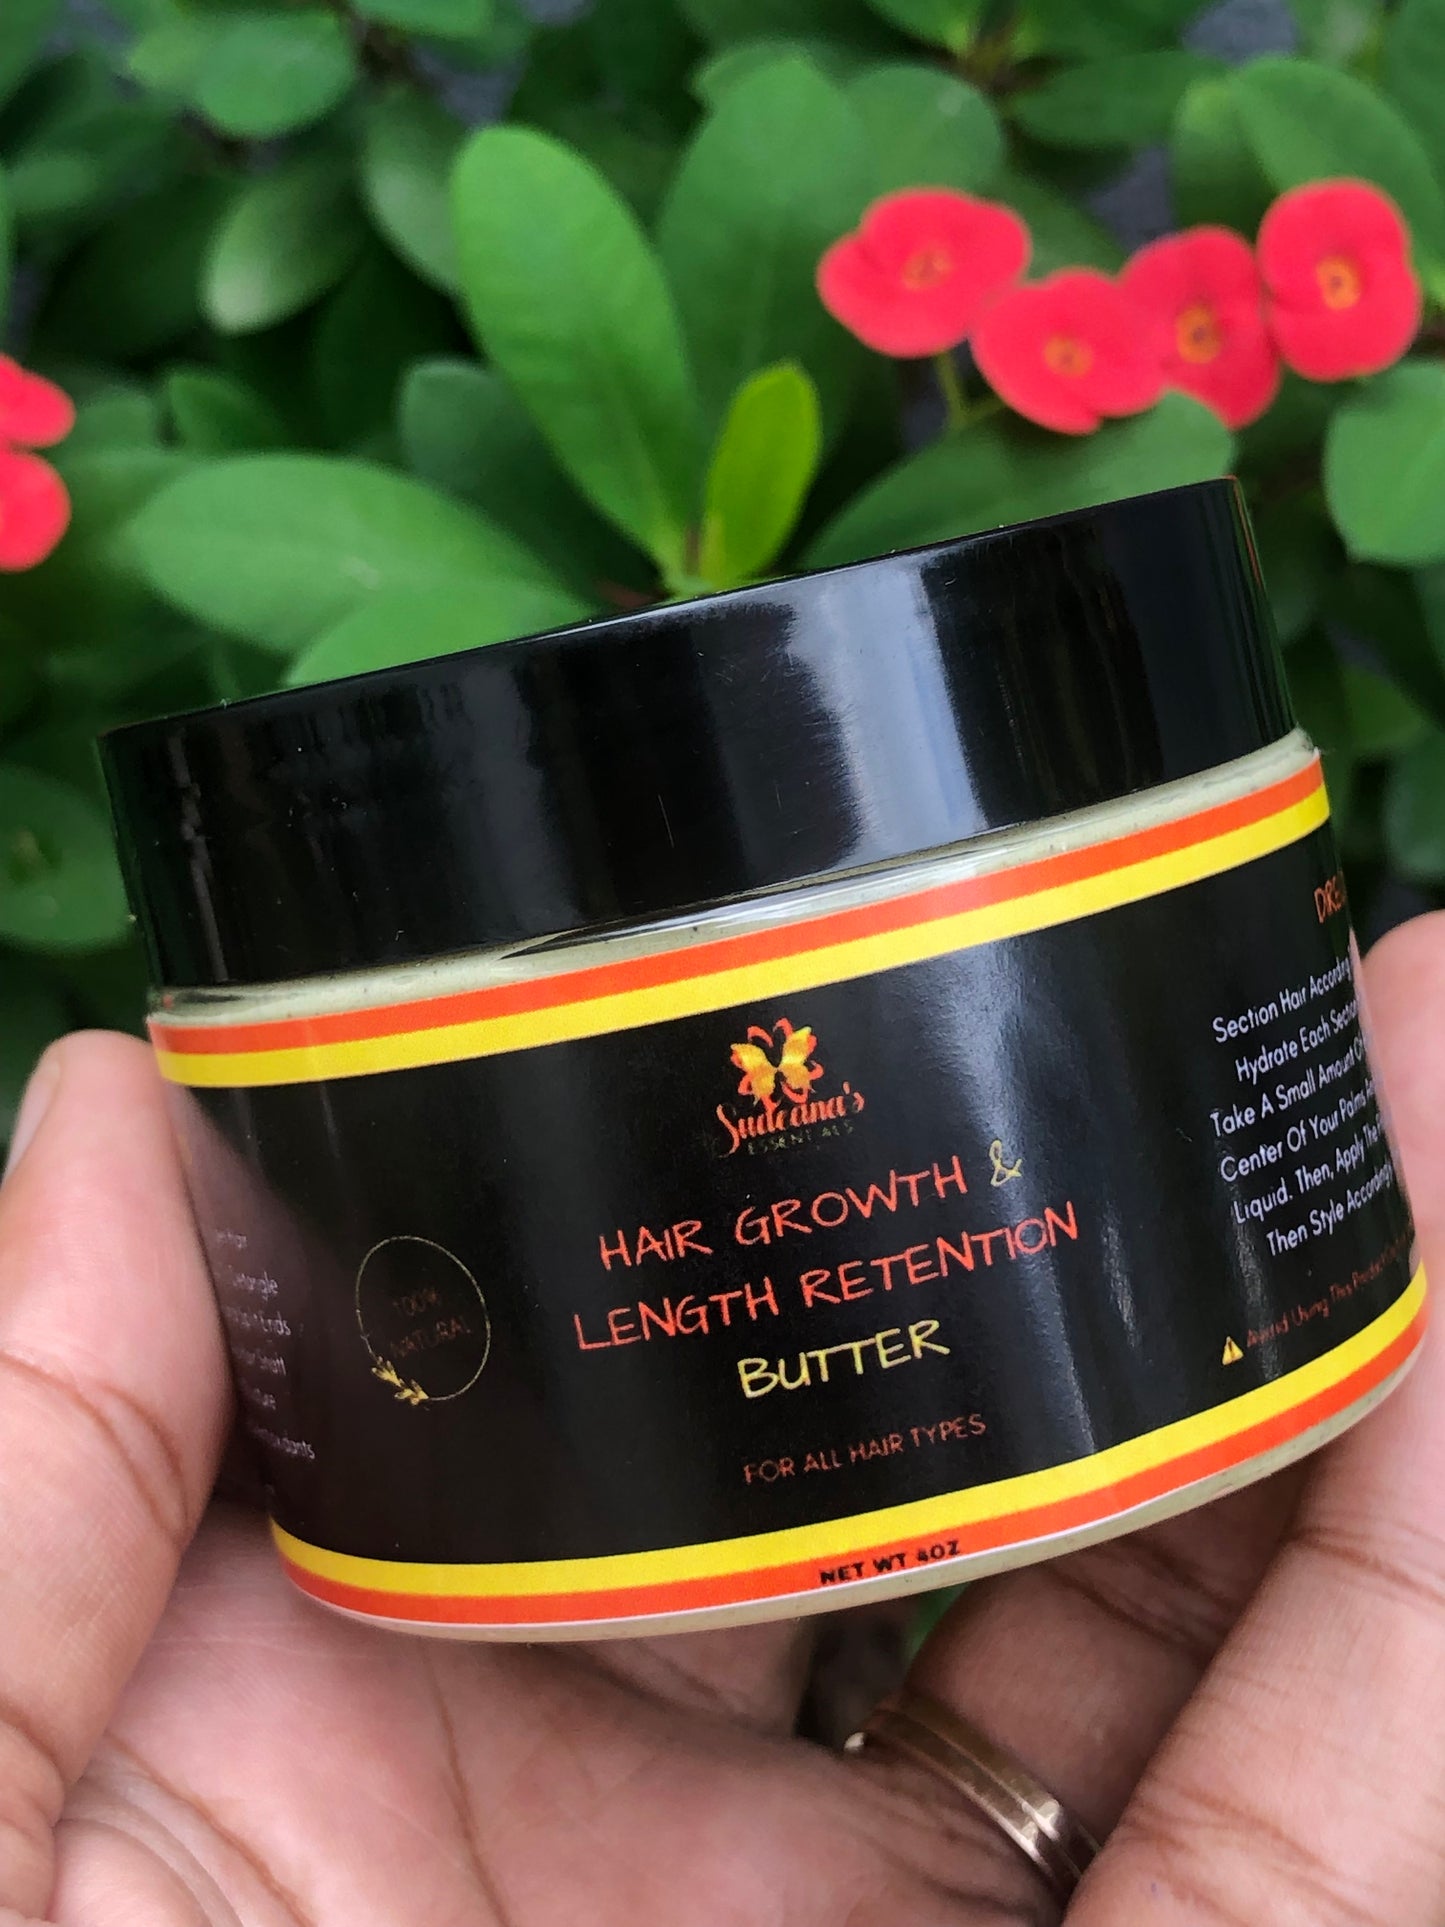 Hair Growth and Length Retention Butter